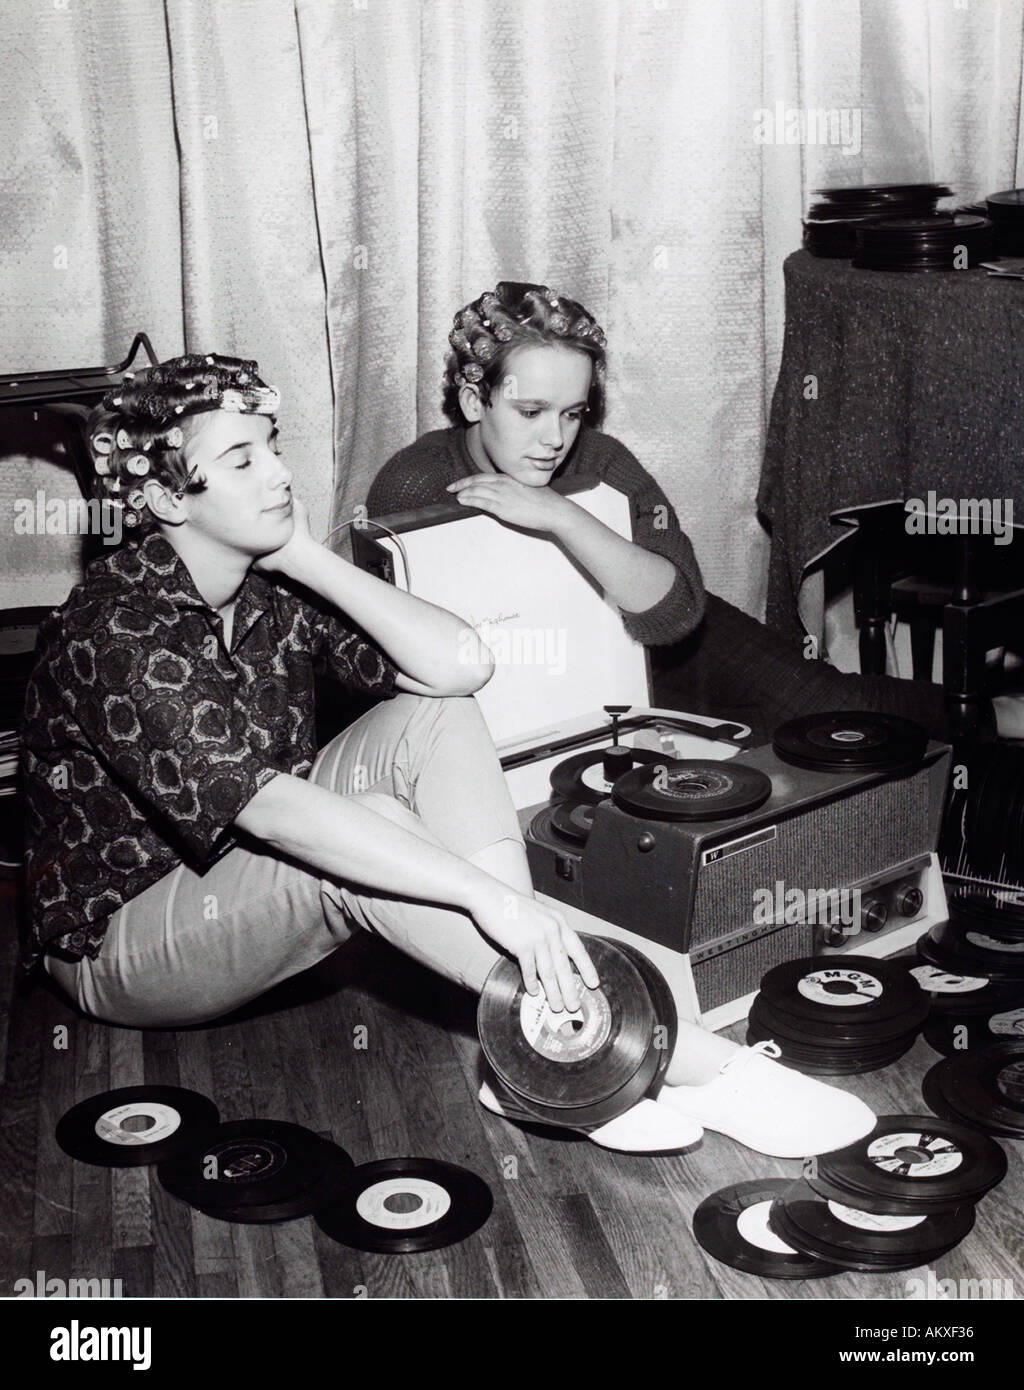 Two Teenage Girls In Curlers Dreamily Listening To 45 Rpm Records On Stock Photo Alamy They do sell images that are protected by a copyright (i.e. https www alamy com two teenage girls in curlers dreamily listening to 45 rpm records image2813749 html